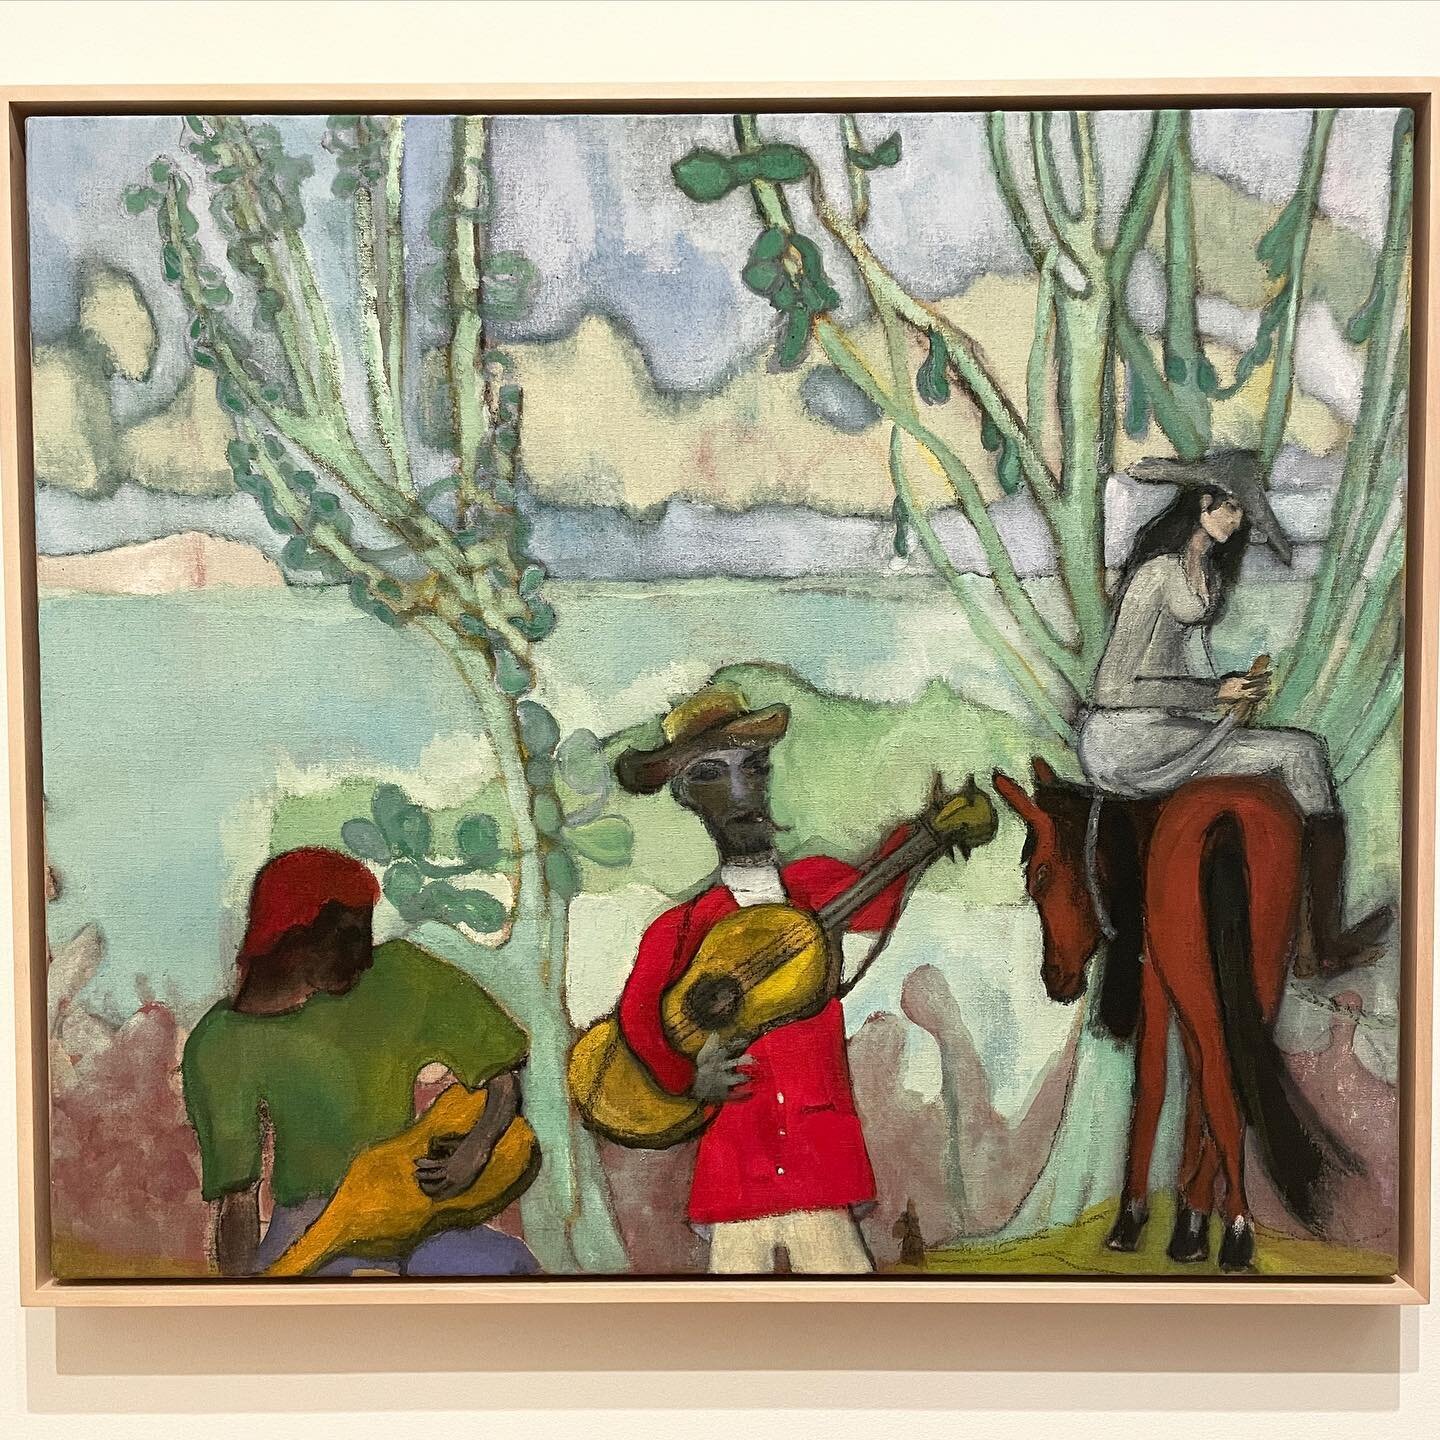 Two from Peter Doig&rsquo;s beautiful and otherworldly show at @courtauld 

1. Music (two trees) 2019 
2. Canal 2023

#painting #colour #figurative #Trinidad #london #regentscanal